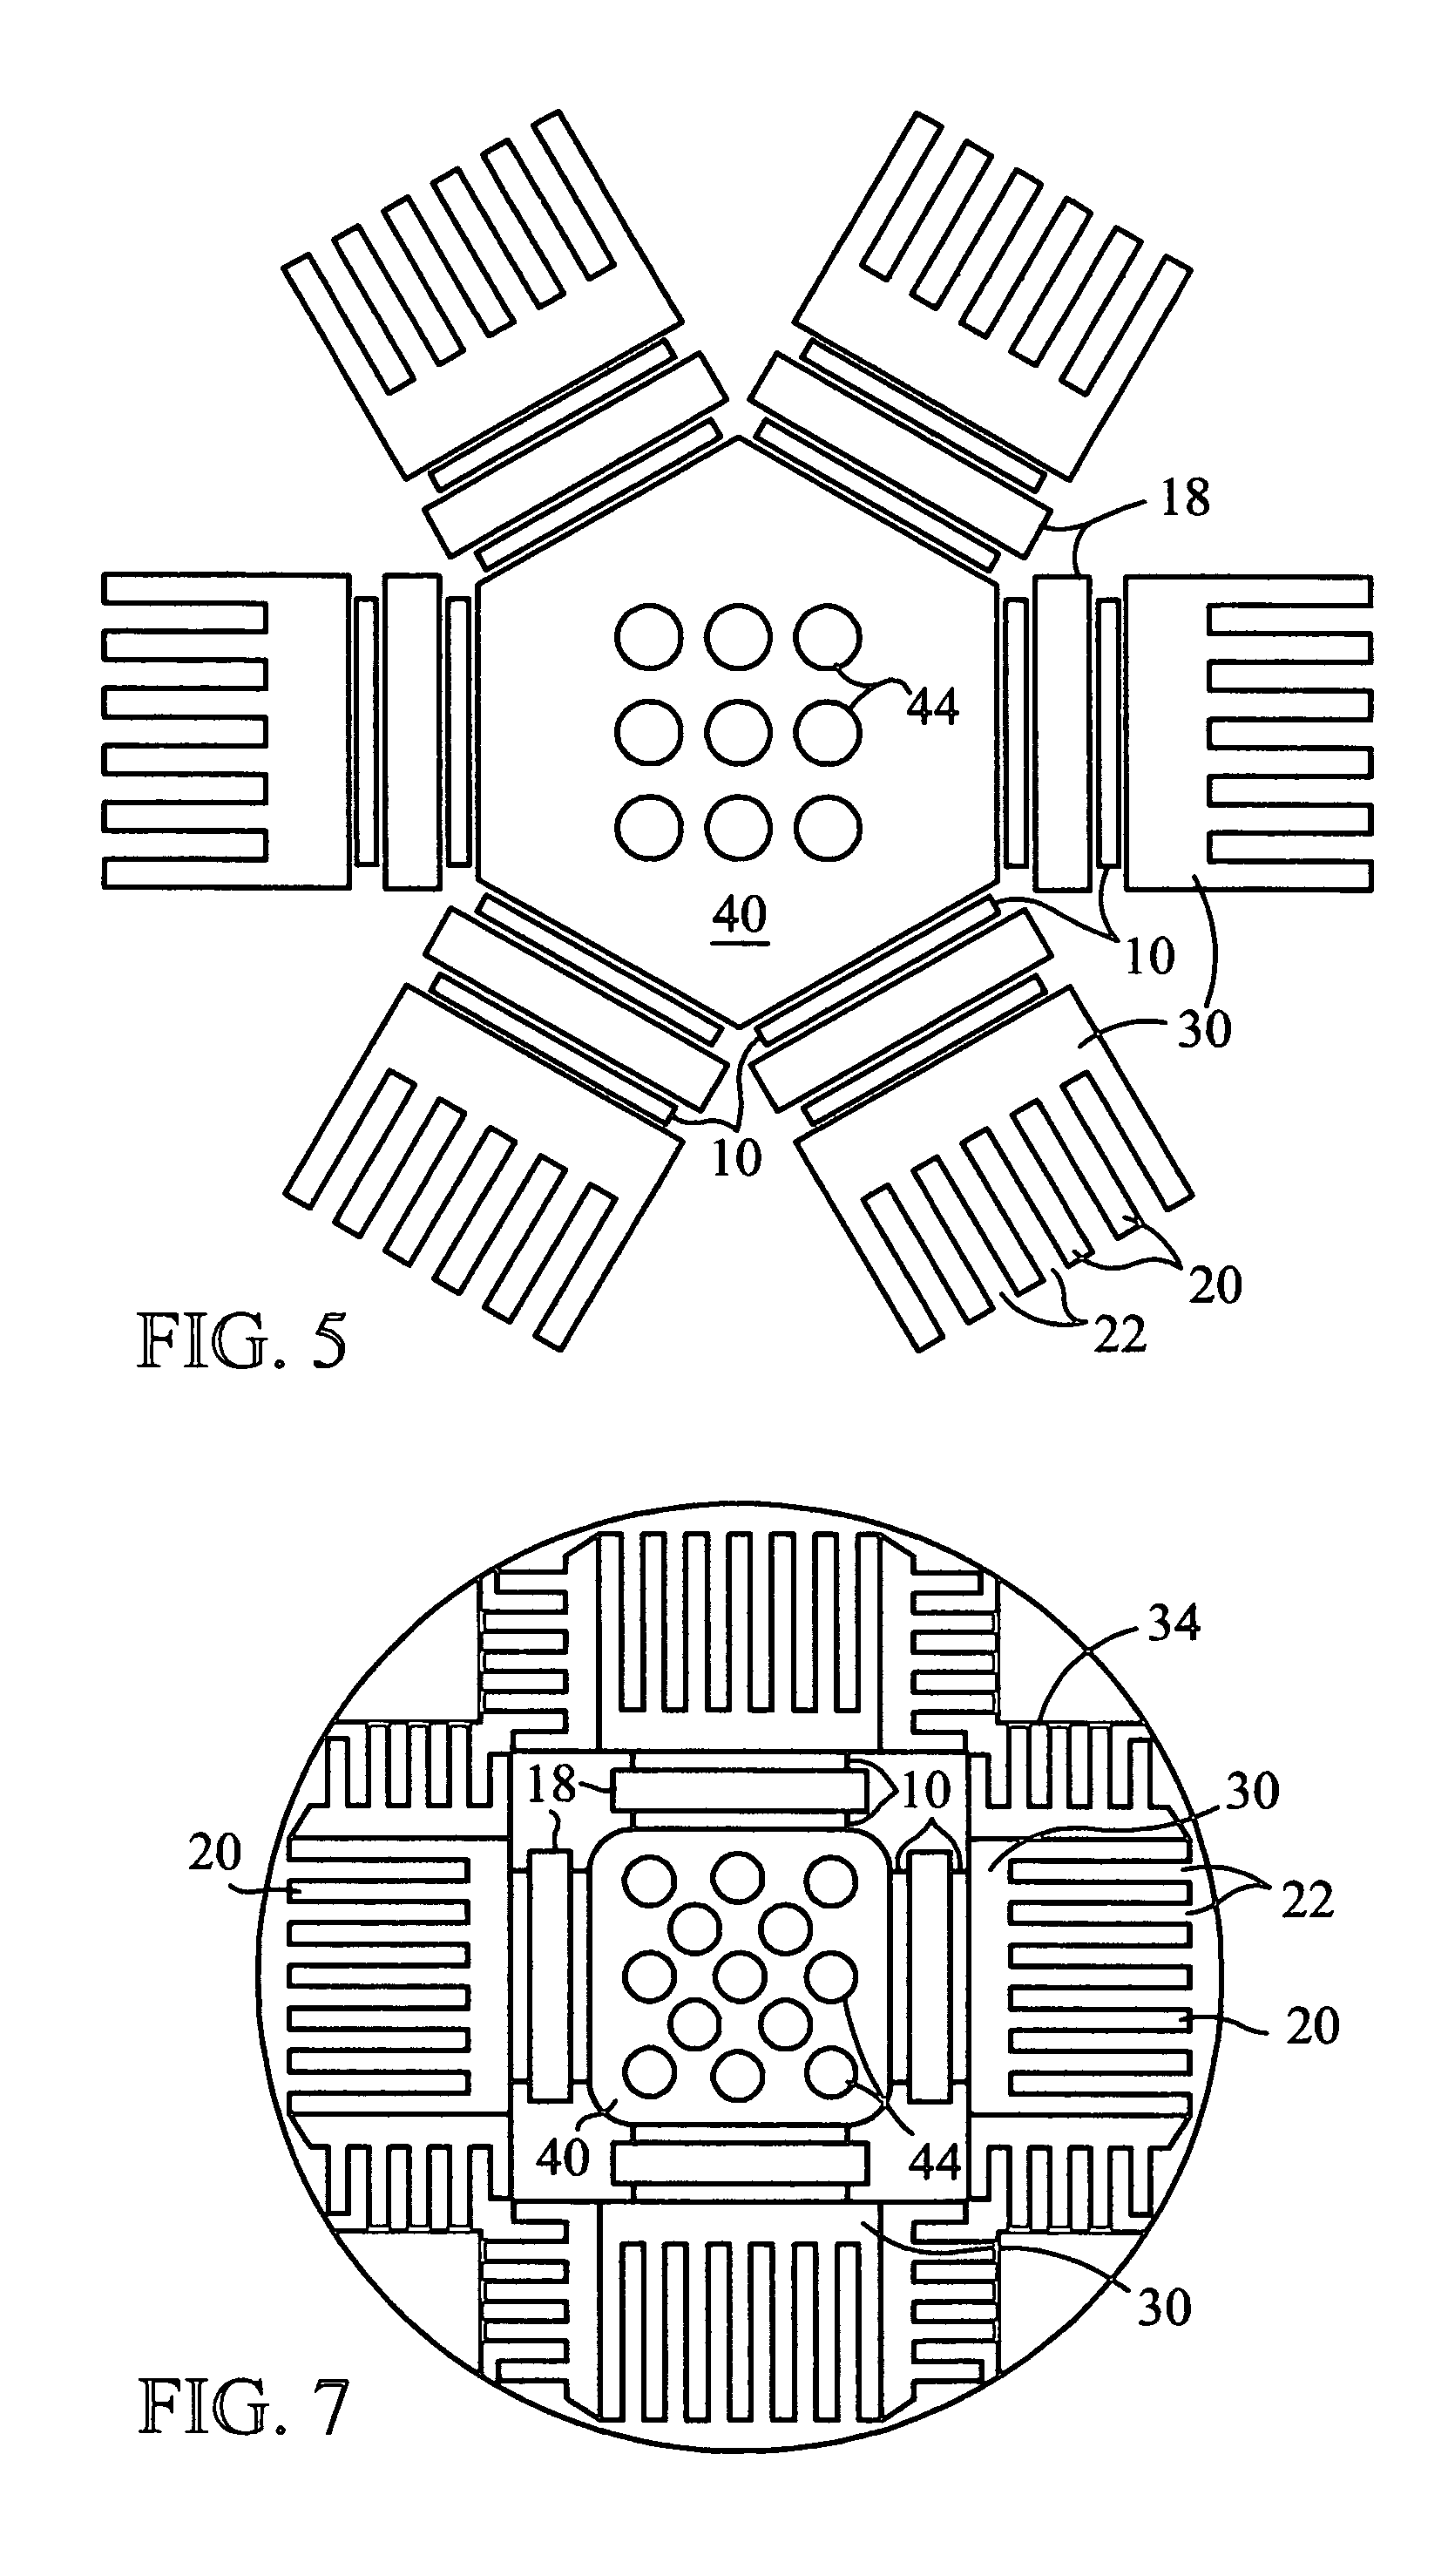 Portable thermoelectric cooling and heating device